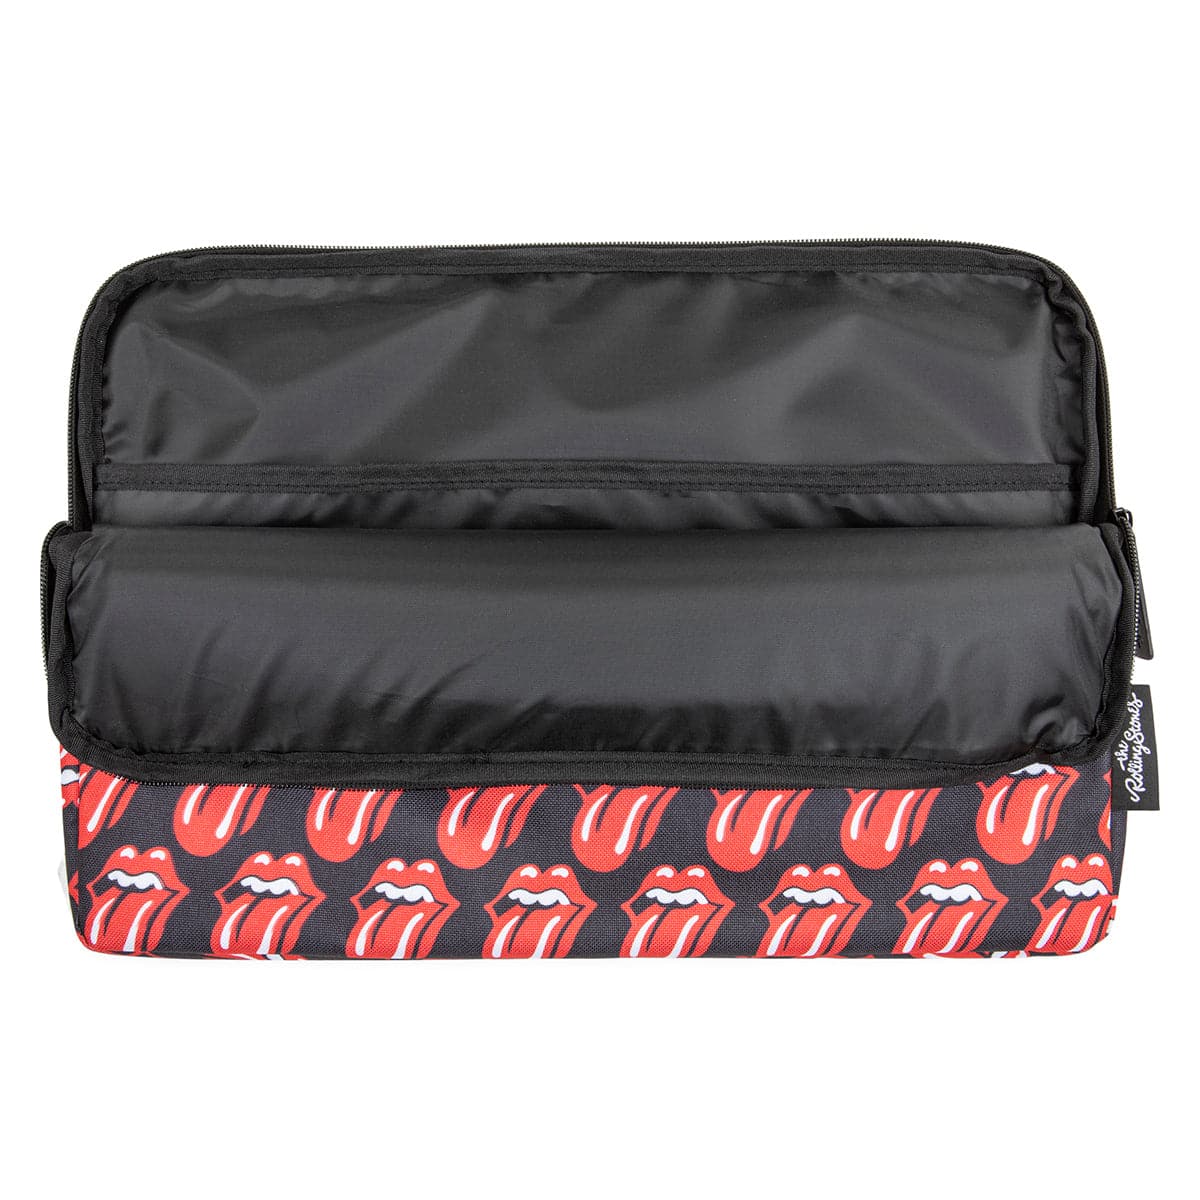 The Rolling Stones The Core Laptop Sleeve